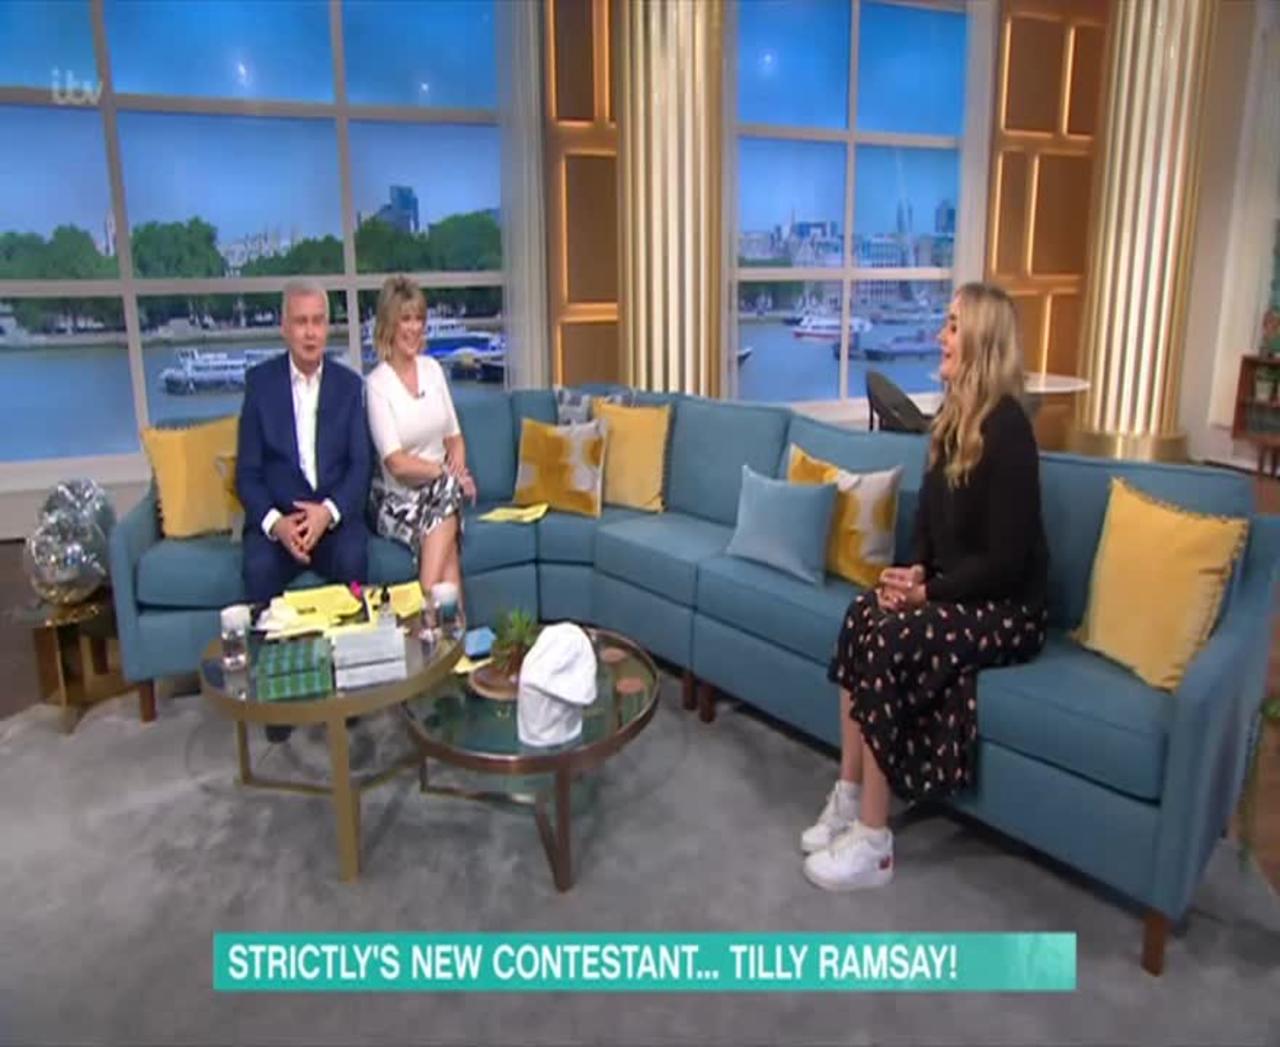 Gordon Ramsay's advice for daughter Tilly ahead of Strictly debut